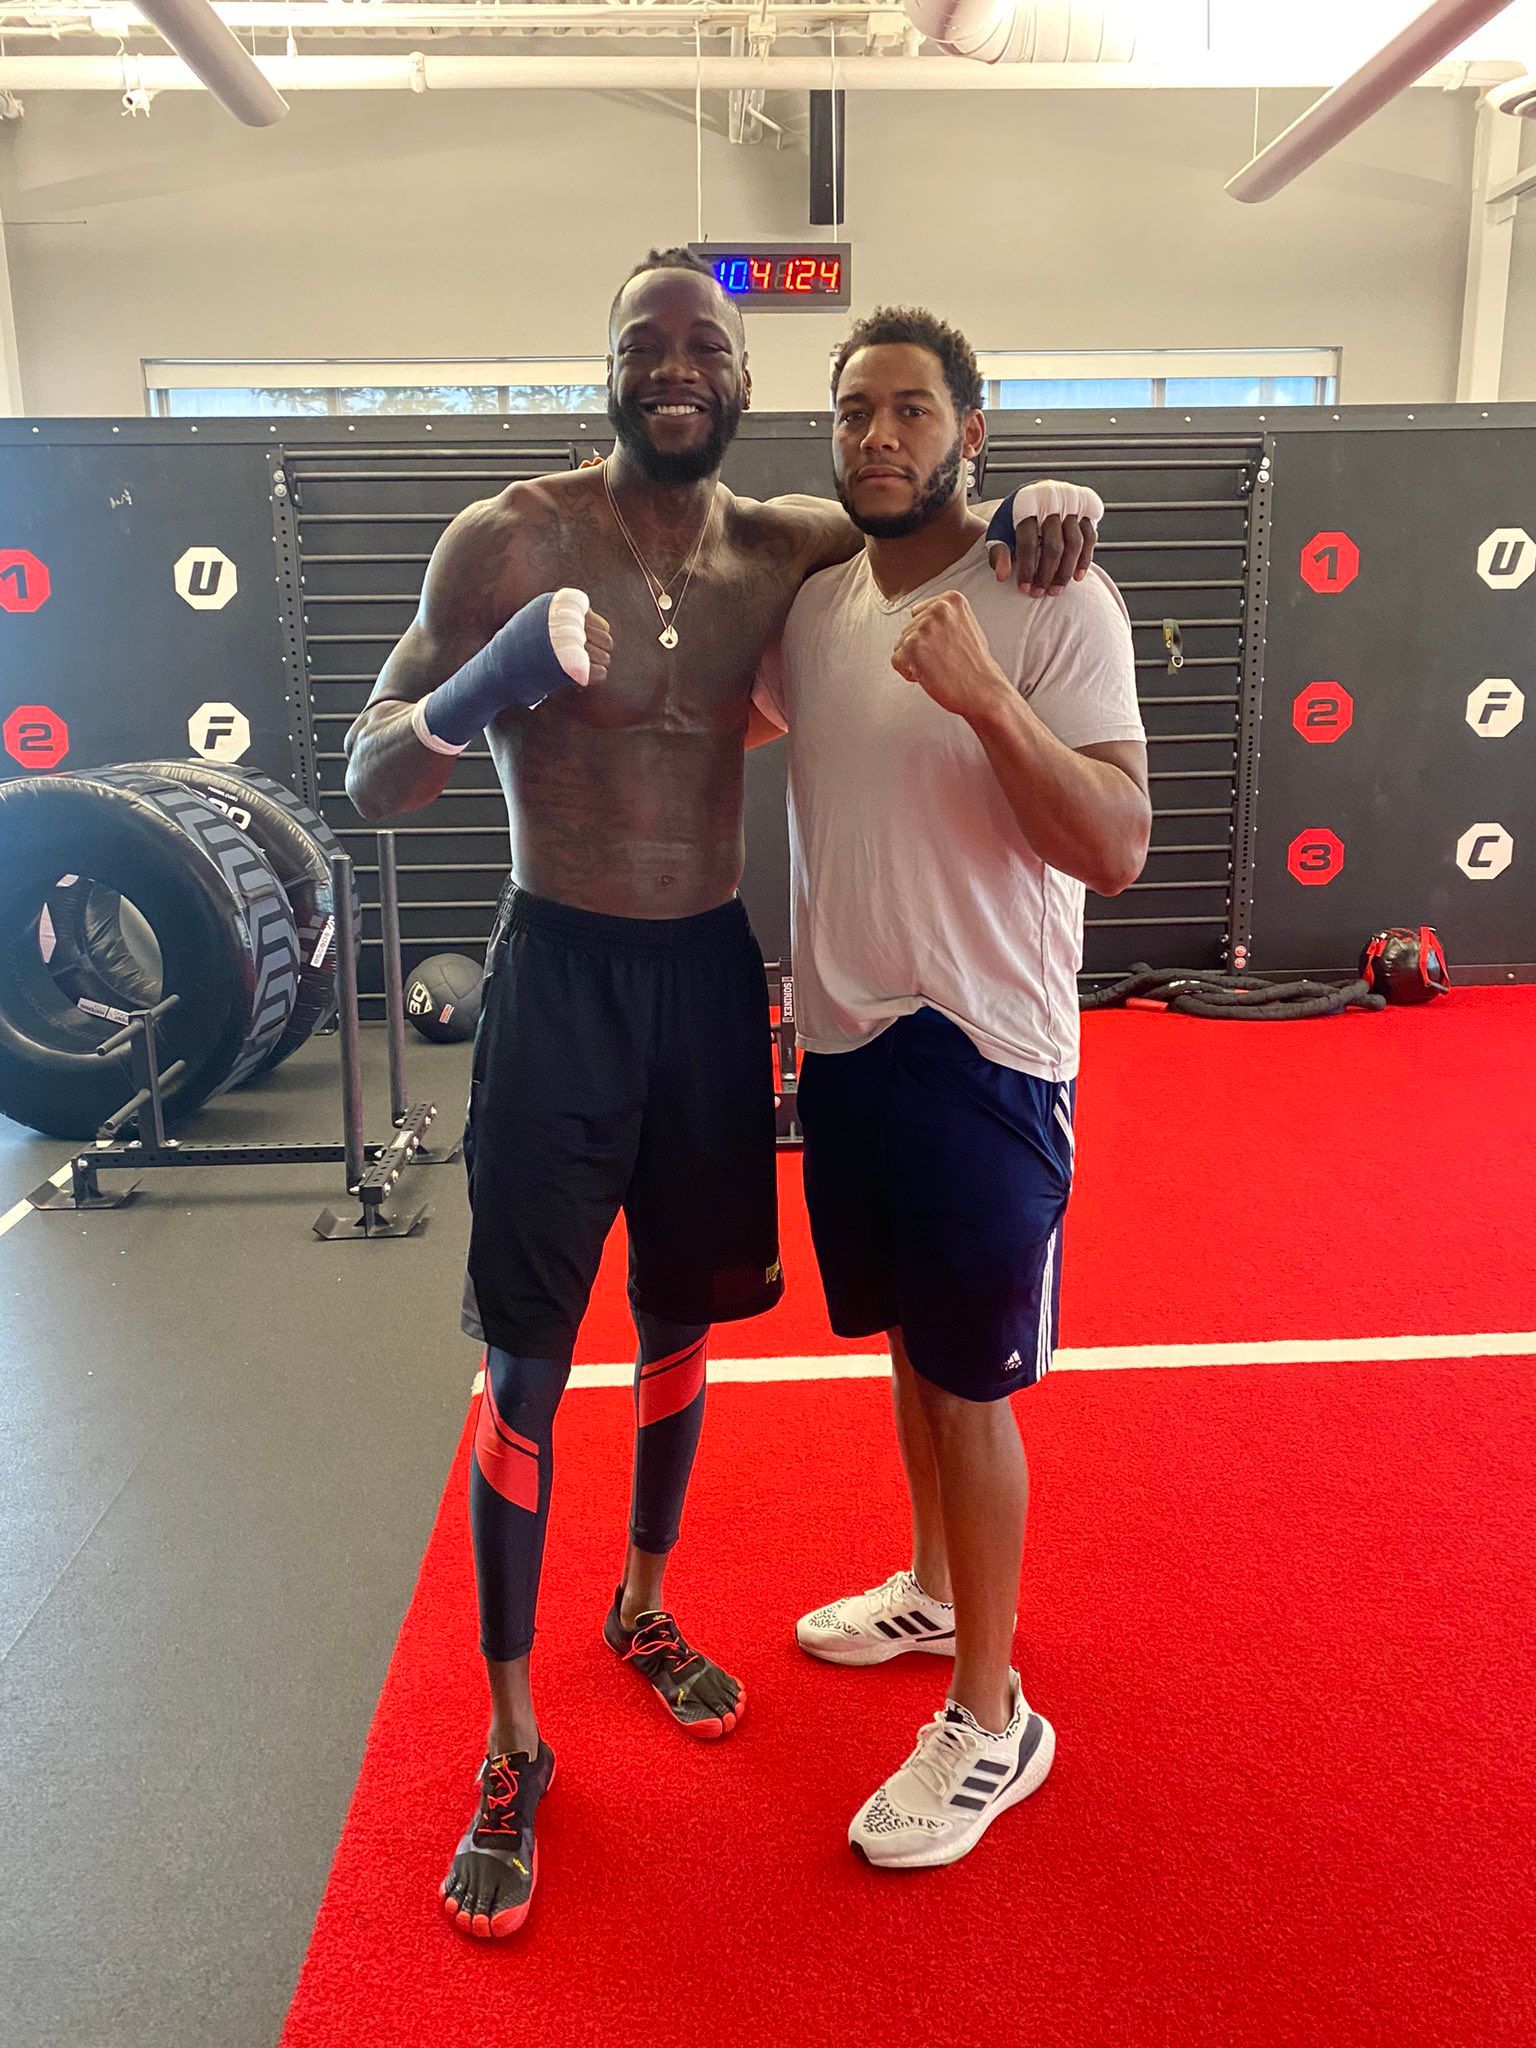 Topless photo has now emerged of Deontay Wilder &amp; he looks a lot thinner than before